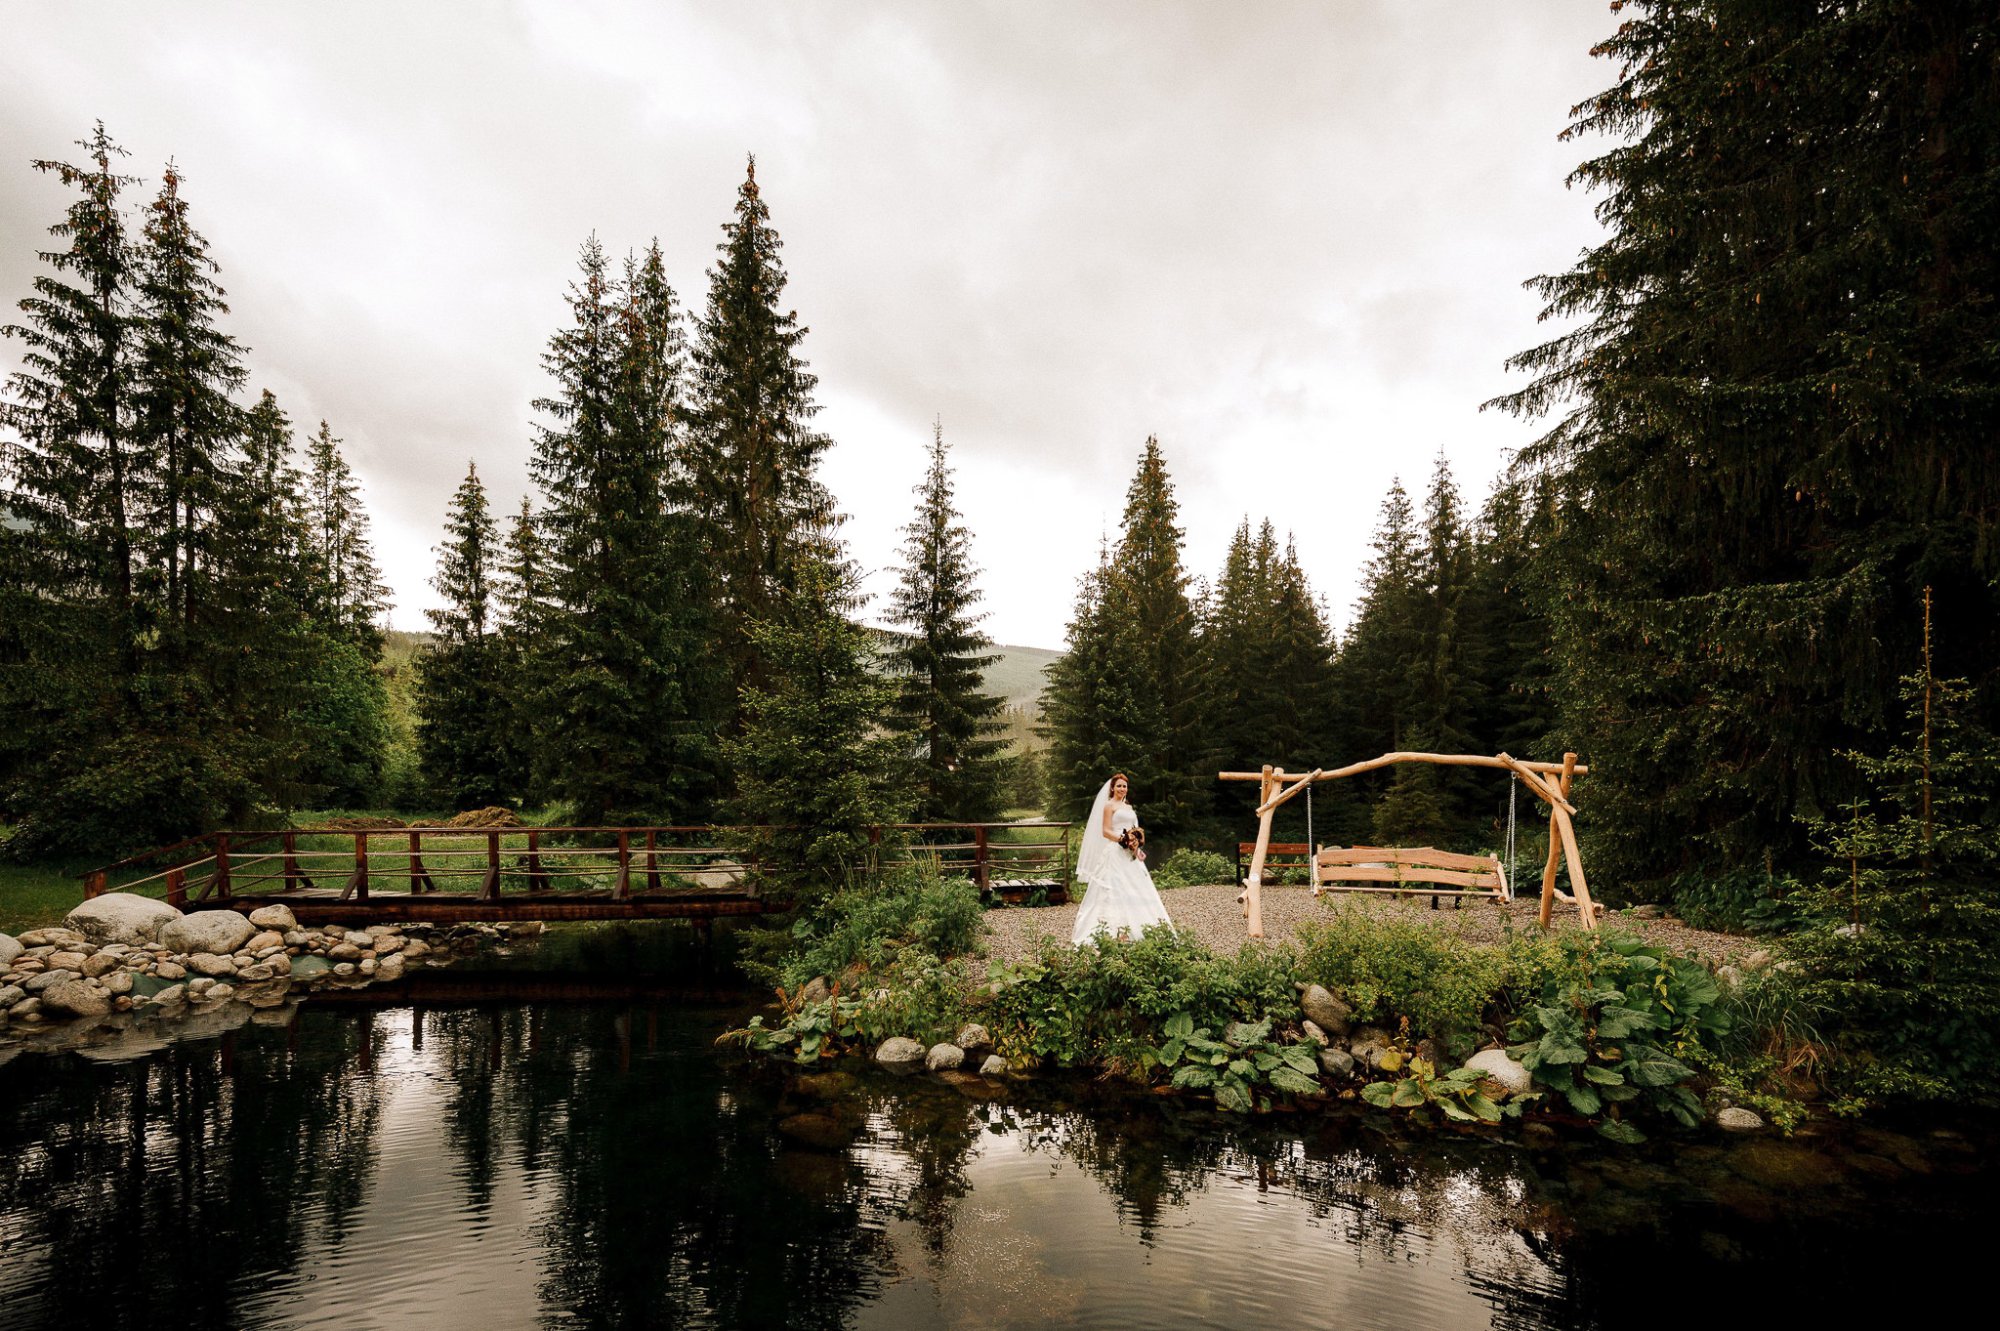 A romantic wedding with a ceremony by the lake